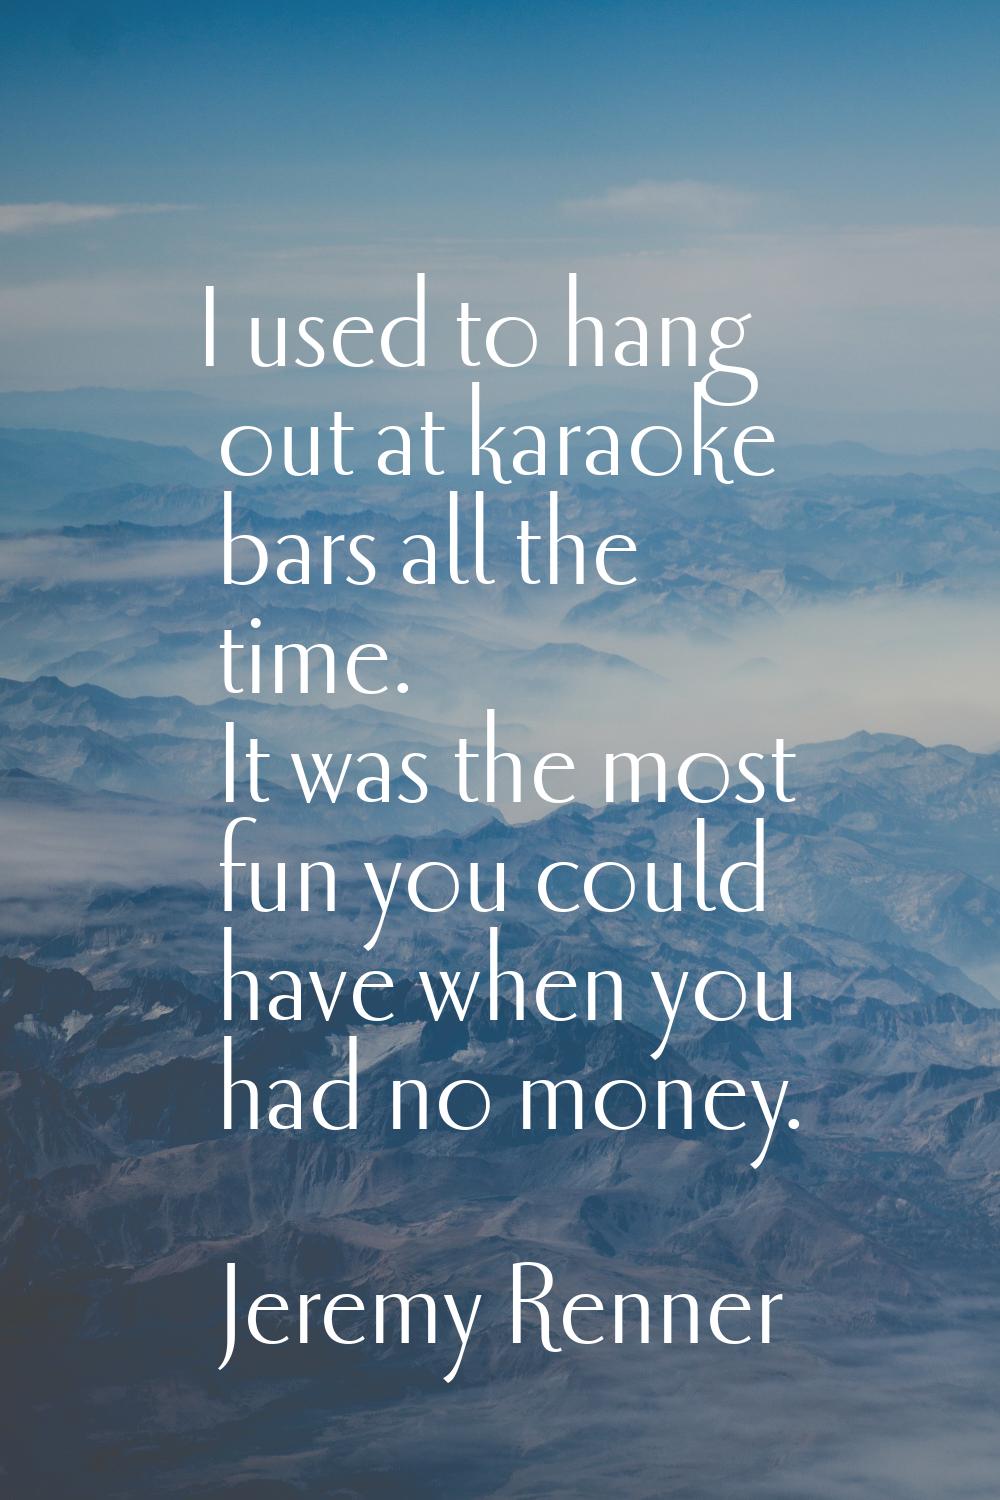 I used to hang out at karaoke bars all the time. It was the most fun you could have when you had no